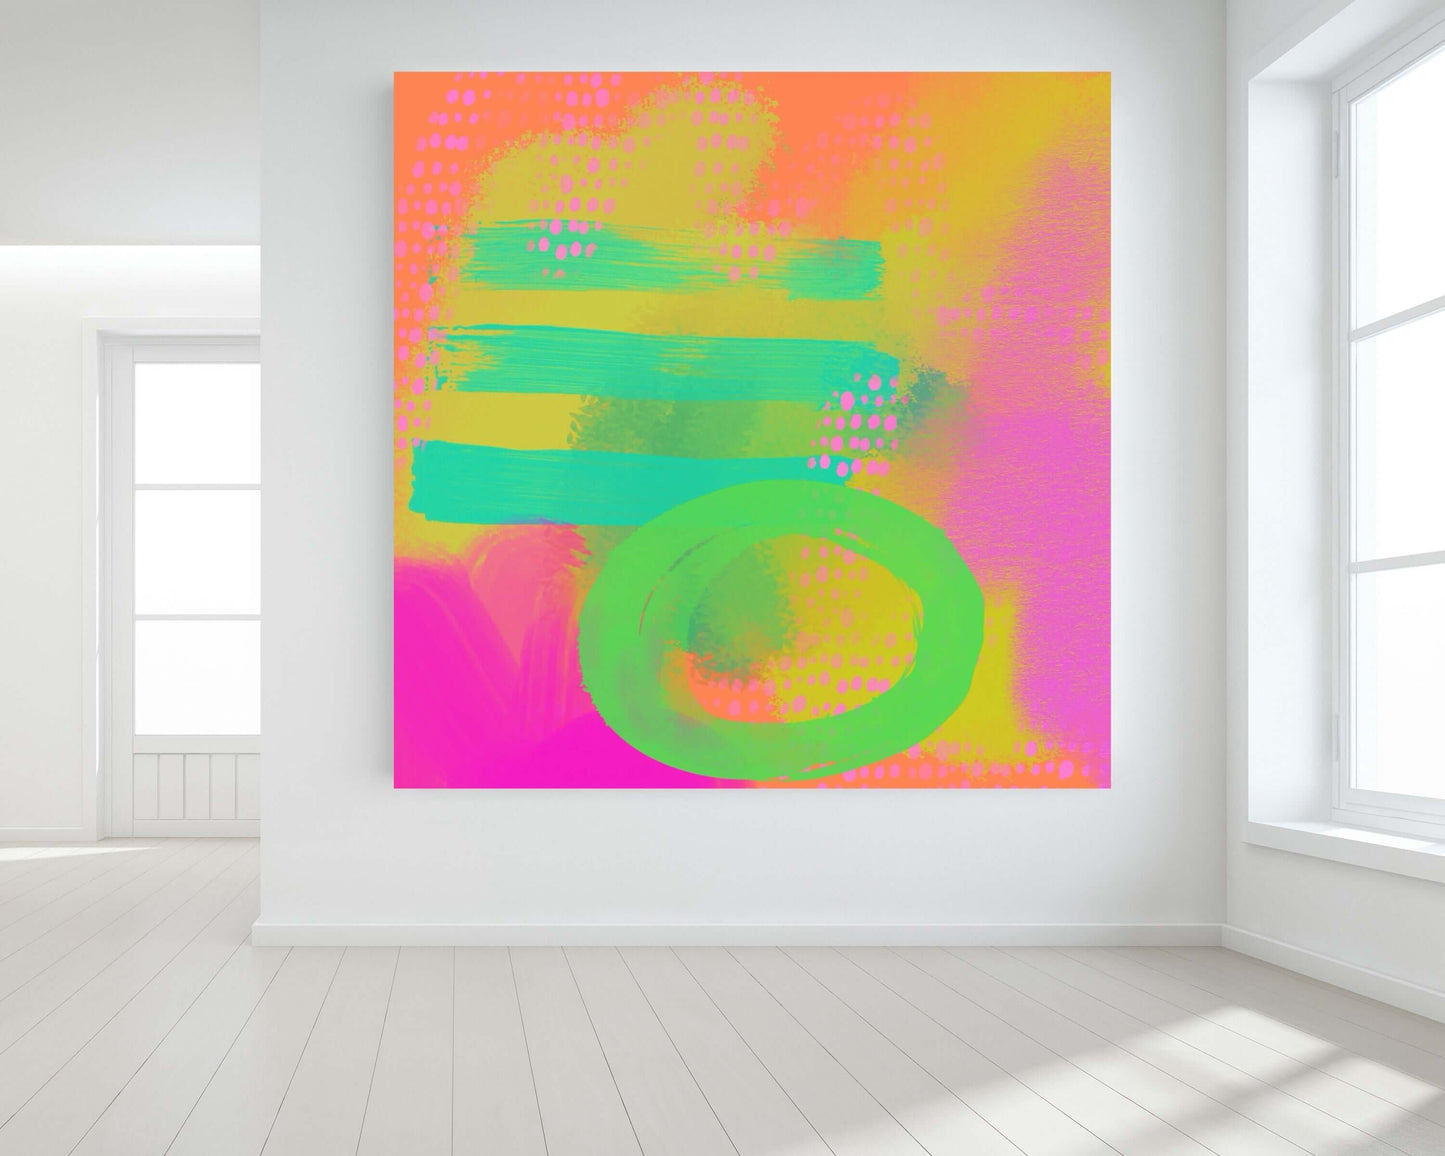 Bright Green, Orange and Pink “Hopscotch” Abstract Art Canvas Print Wall Art Large Canvas on Wall